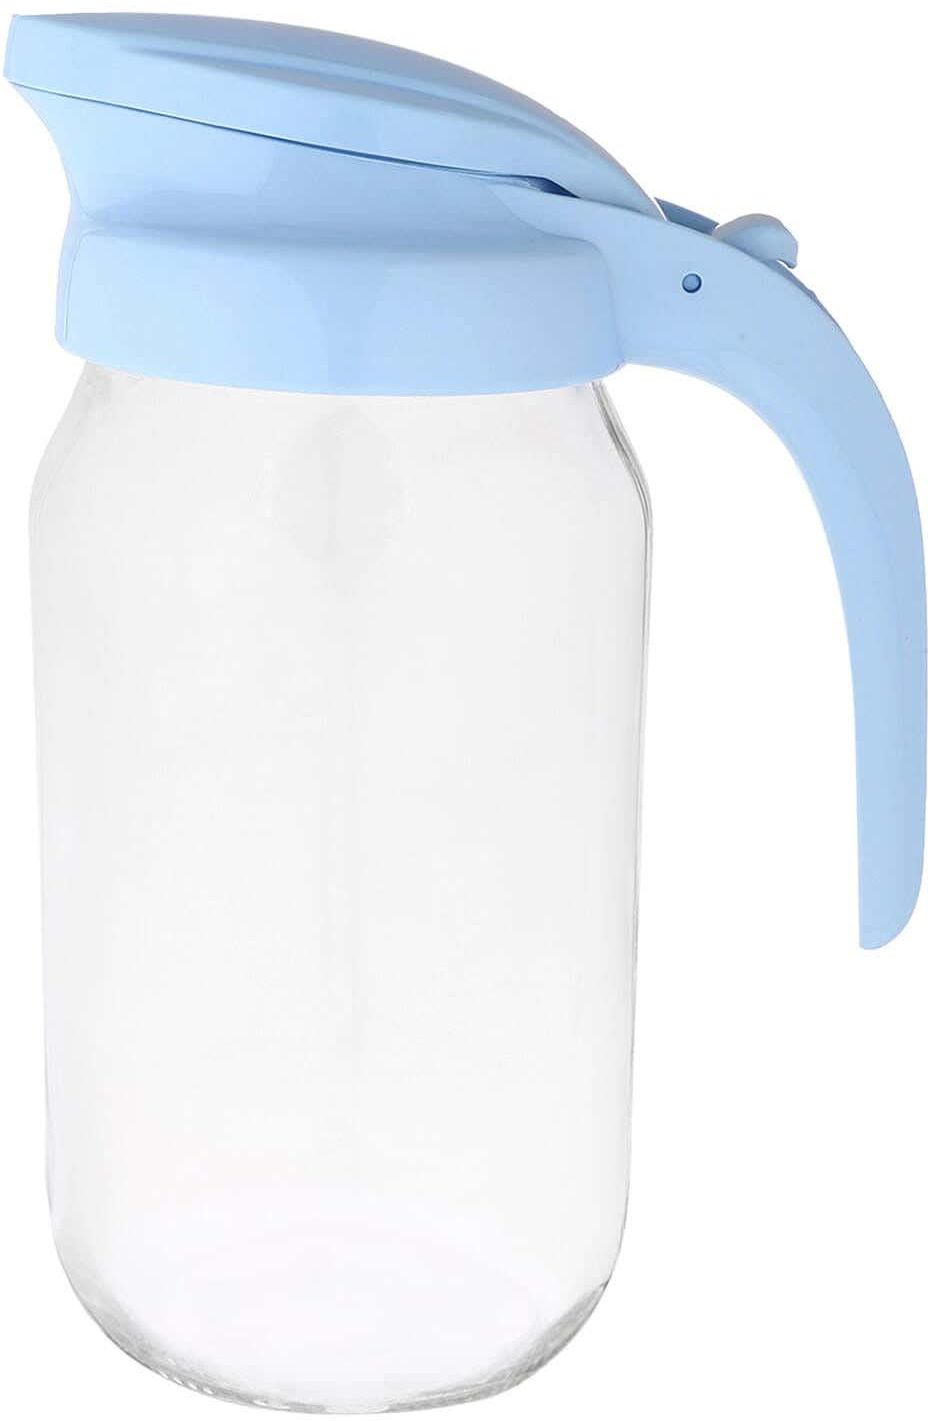 Get Renga Glass Pitcher With A Plastic Lid, 1 Liter - Light Blue with best offers | Raneen.com